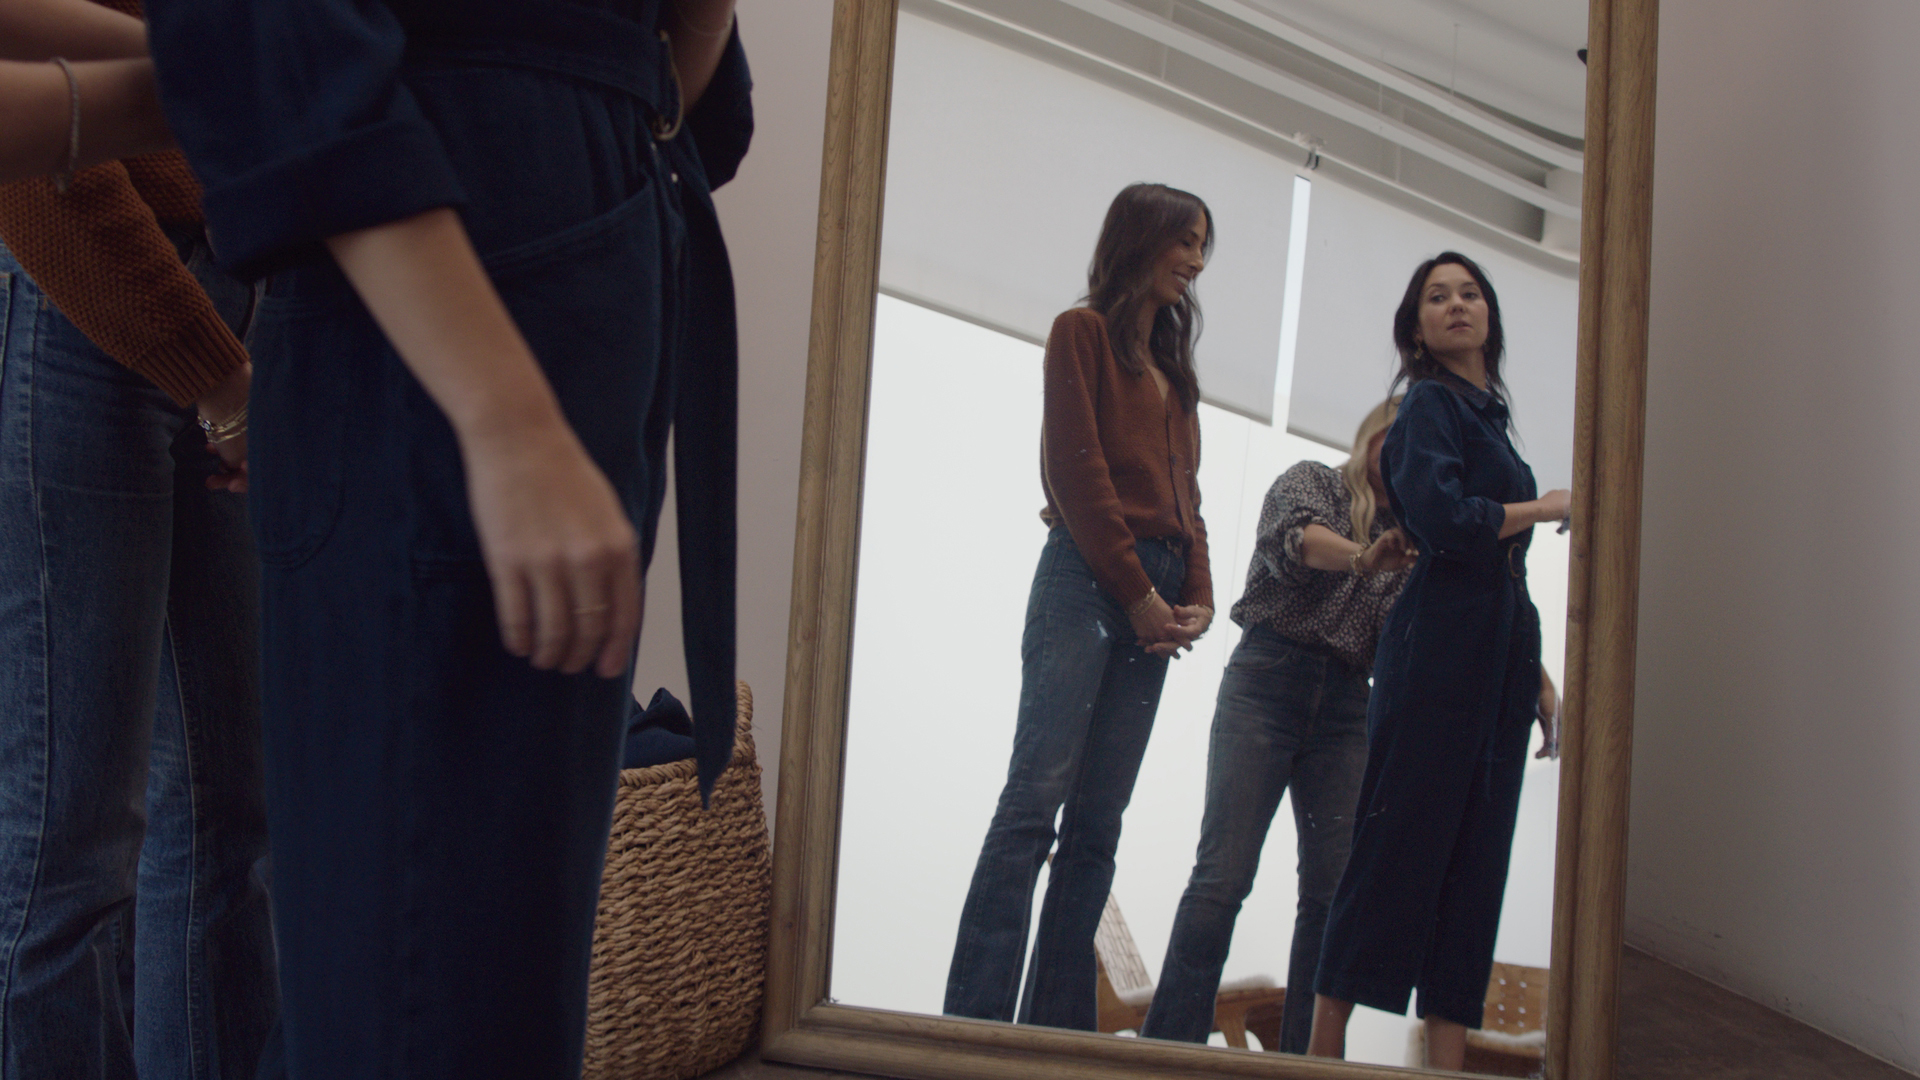 Entrepreneurs and founders of THE GREAT., Meritt Elliott and Emily Current, style their reimagined Rosie denim jumpsuit for the Cotton collaboration for Rosie Reborn with Julia Gamolina, acclaimed leader in the architecture world. Photo Credit: Cotton Incorporated